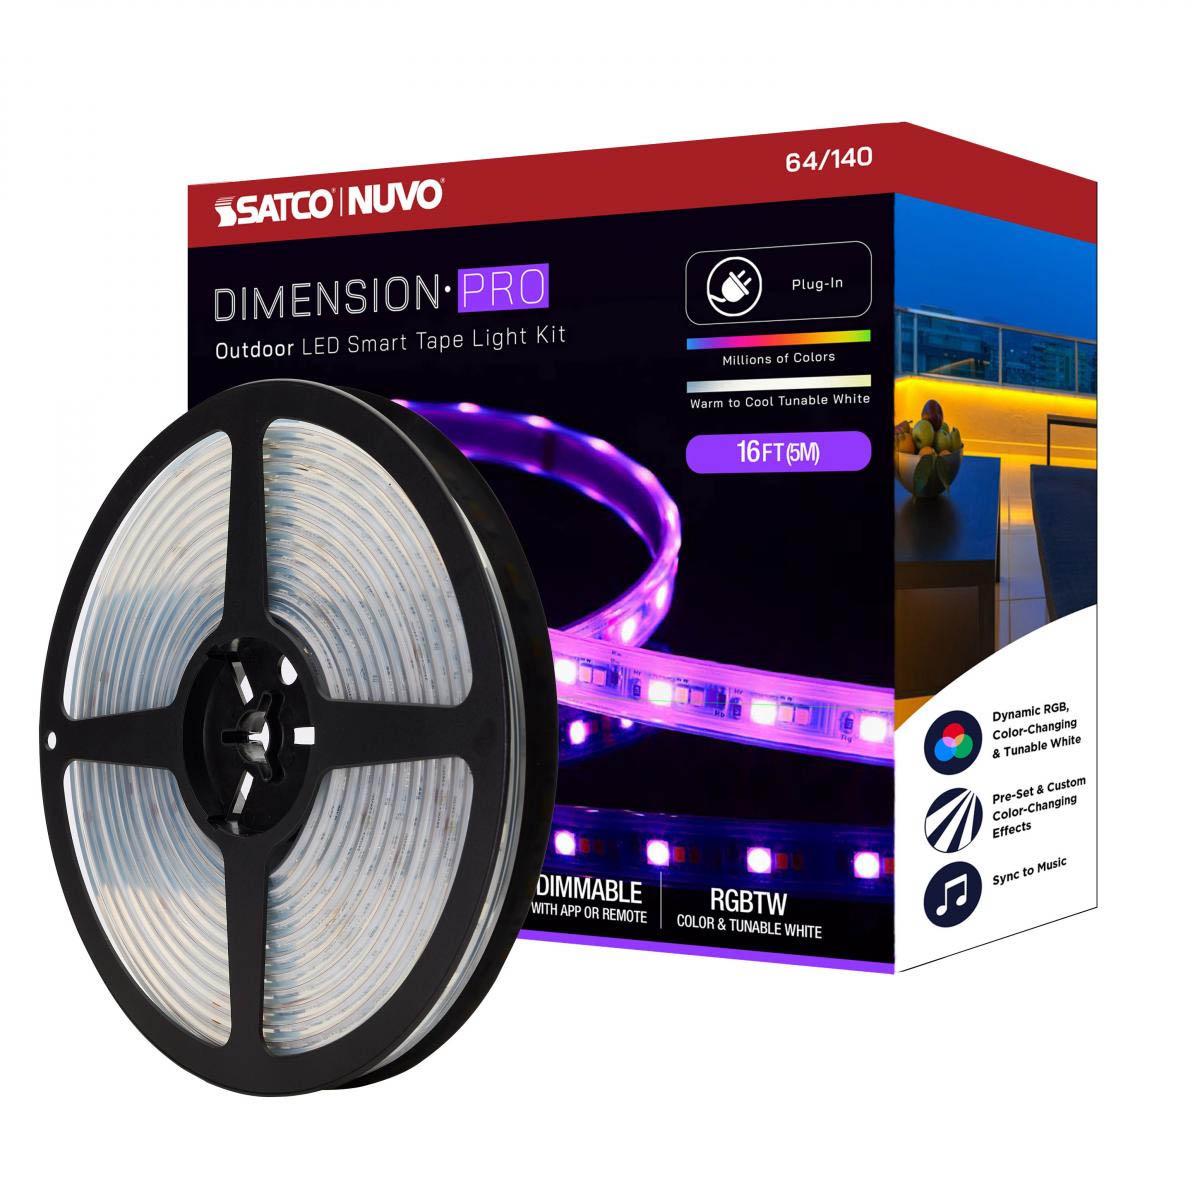 Dimension Pro Outdoor Smart LED Tape Light Kit with Remote, 16ft Reel, Color Changing RGB and Tunable White, 24V, Plug Connection